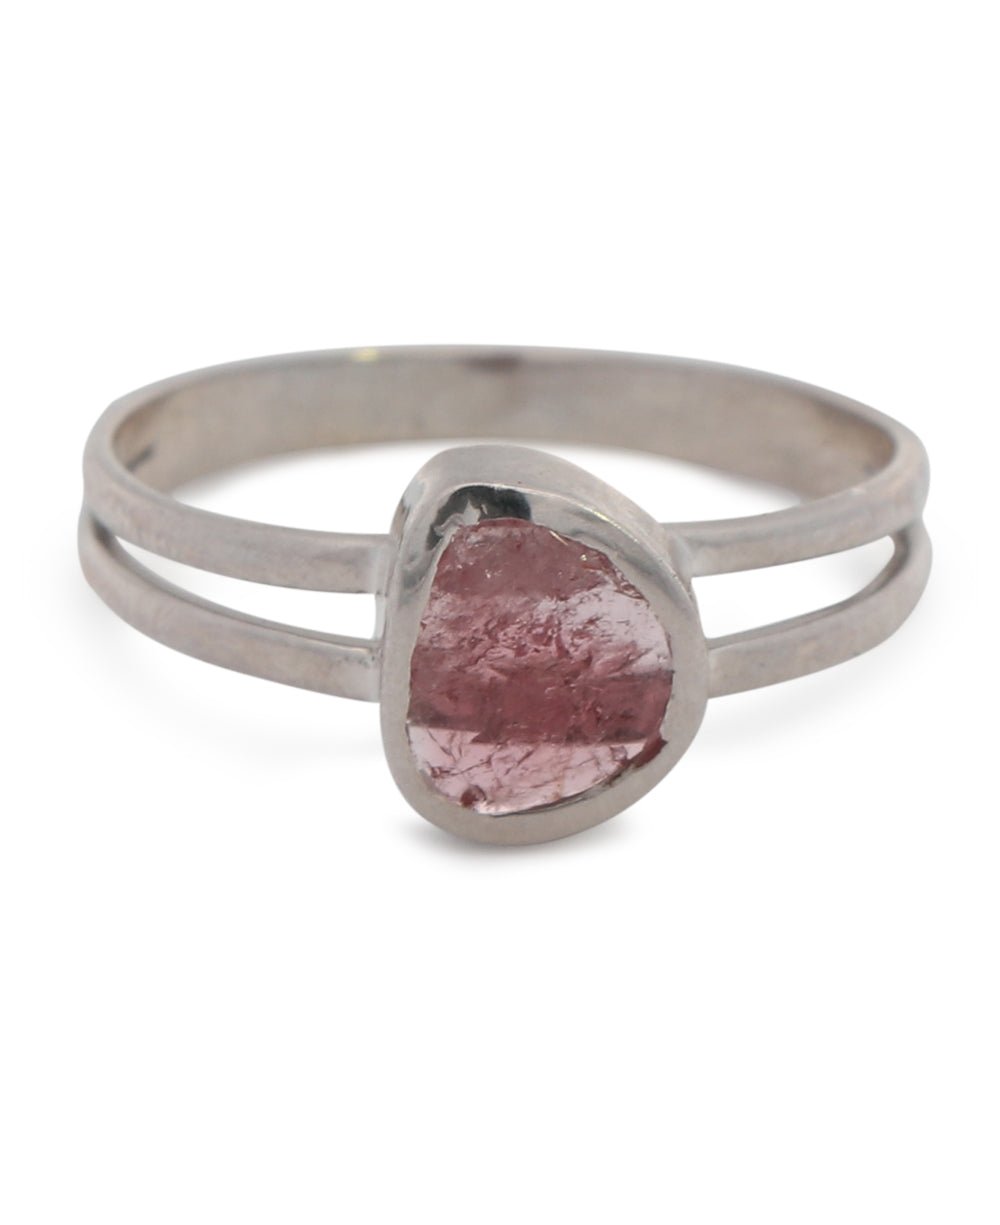 Imperfectly Perfect Pink Tourmaline Sterling Silver Ring - Rings Size 6